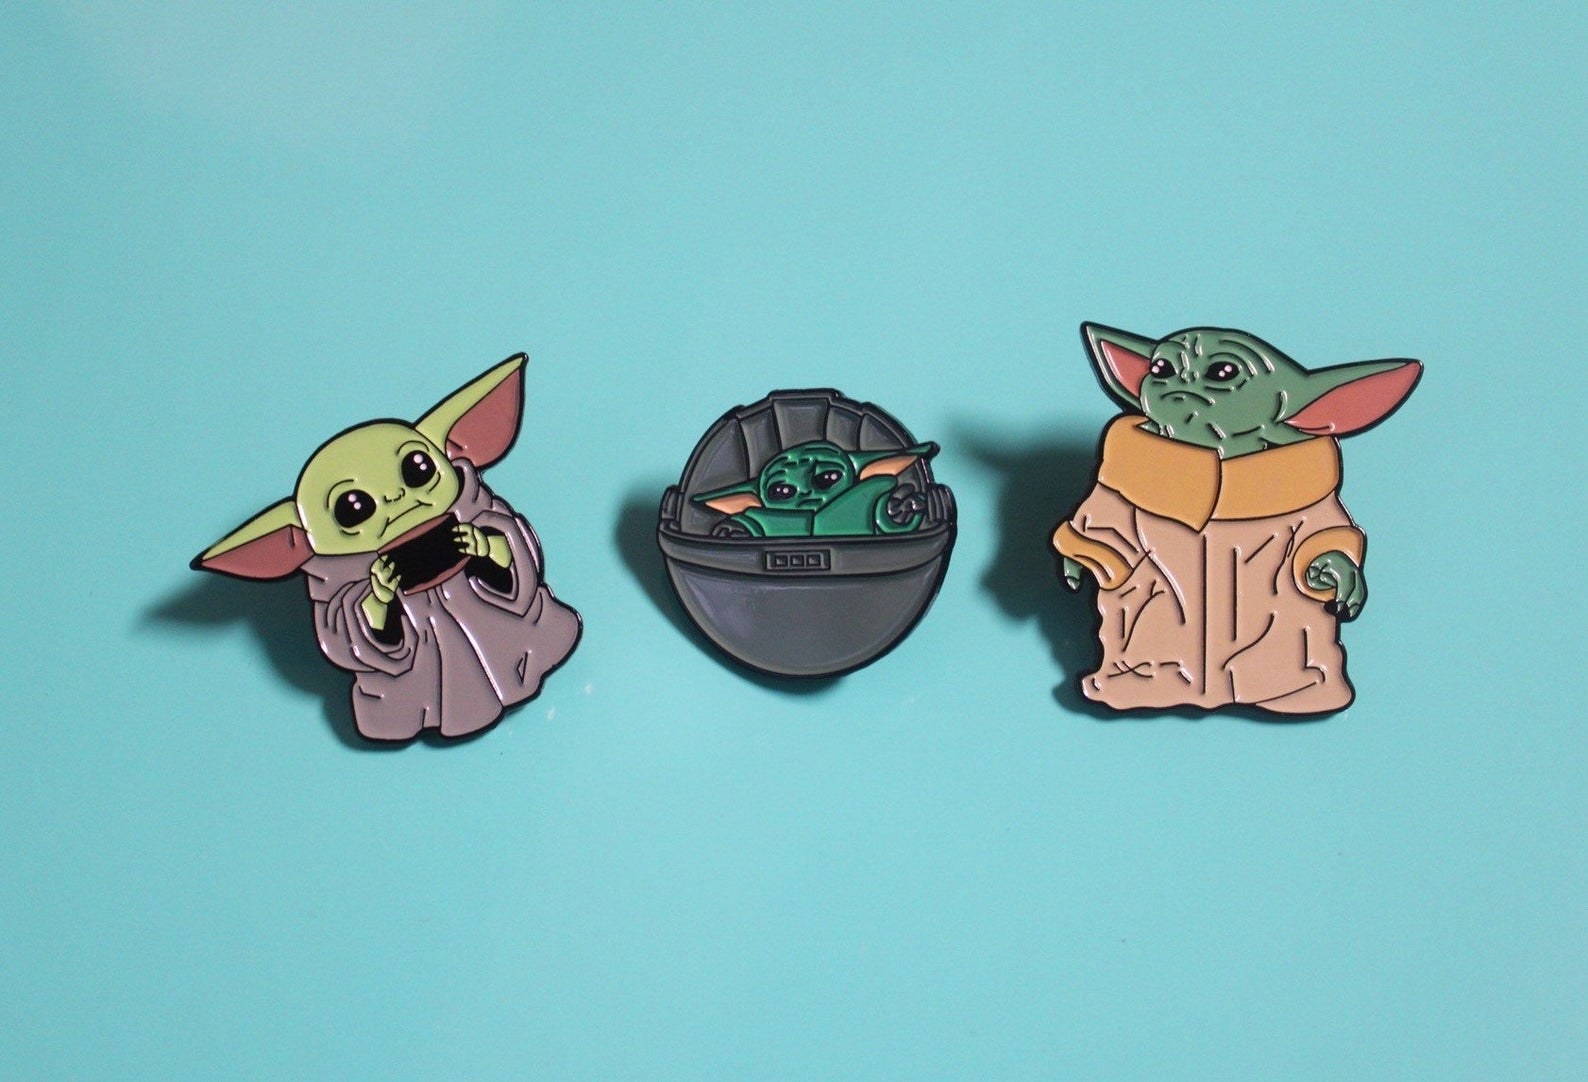 three Yoda pins. The first is Baby Yoda holding a cup. The second is Baby Yoda sitting inside of the Death Star. The third is adult Yoda.